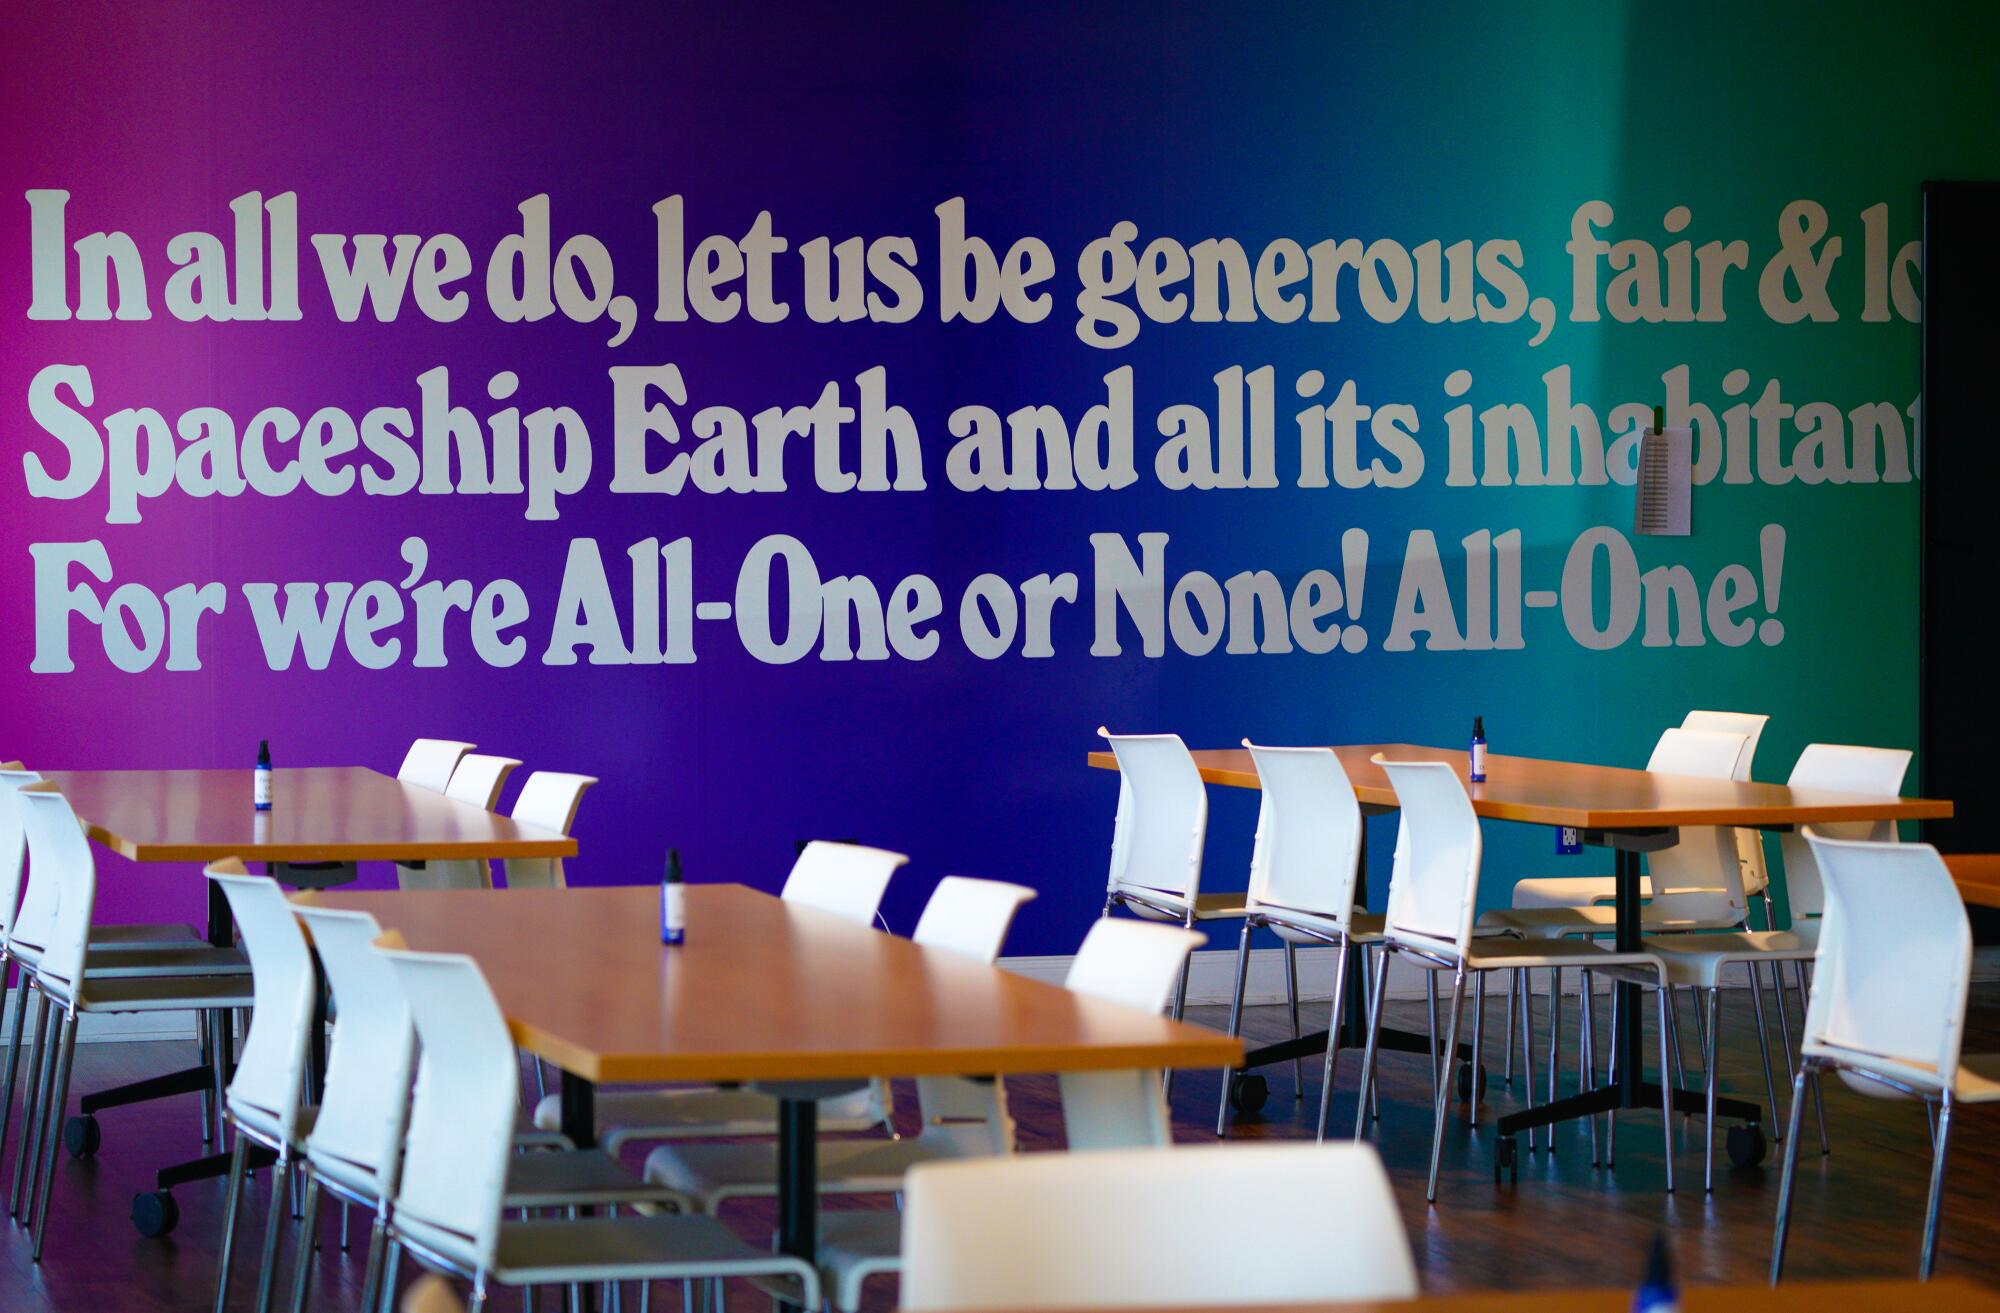 Empty tables and chairs in front of a colorful mural with a saying that reads in part, "In all we do, let us be generous."